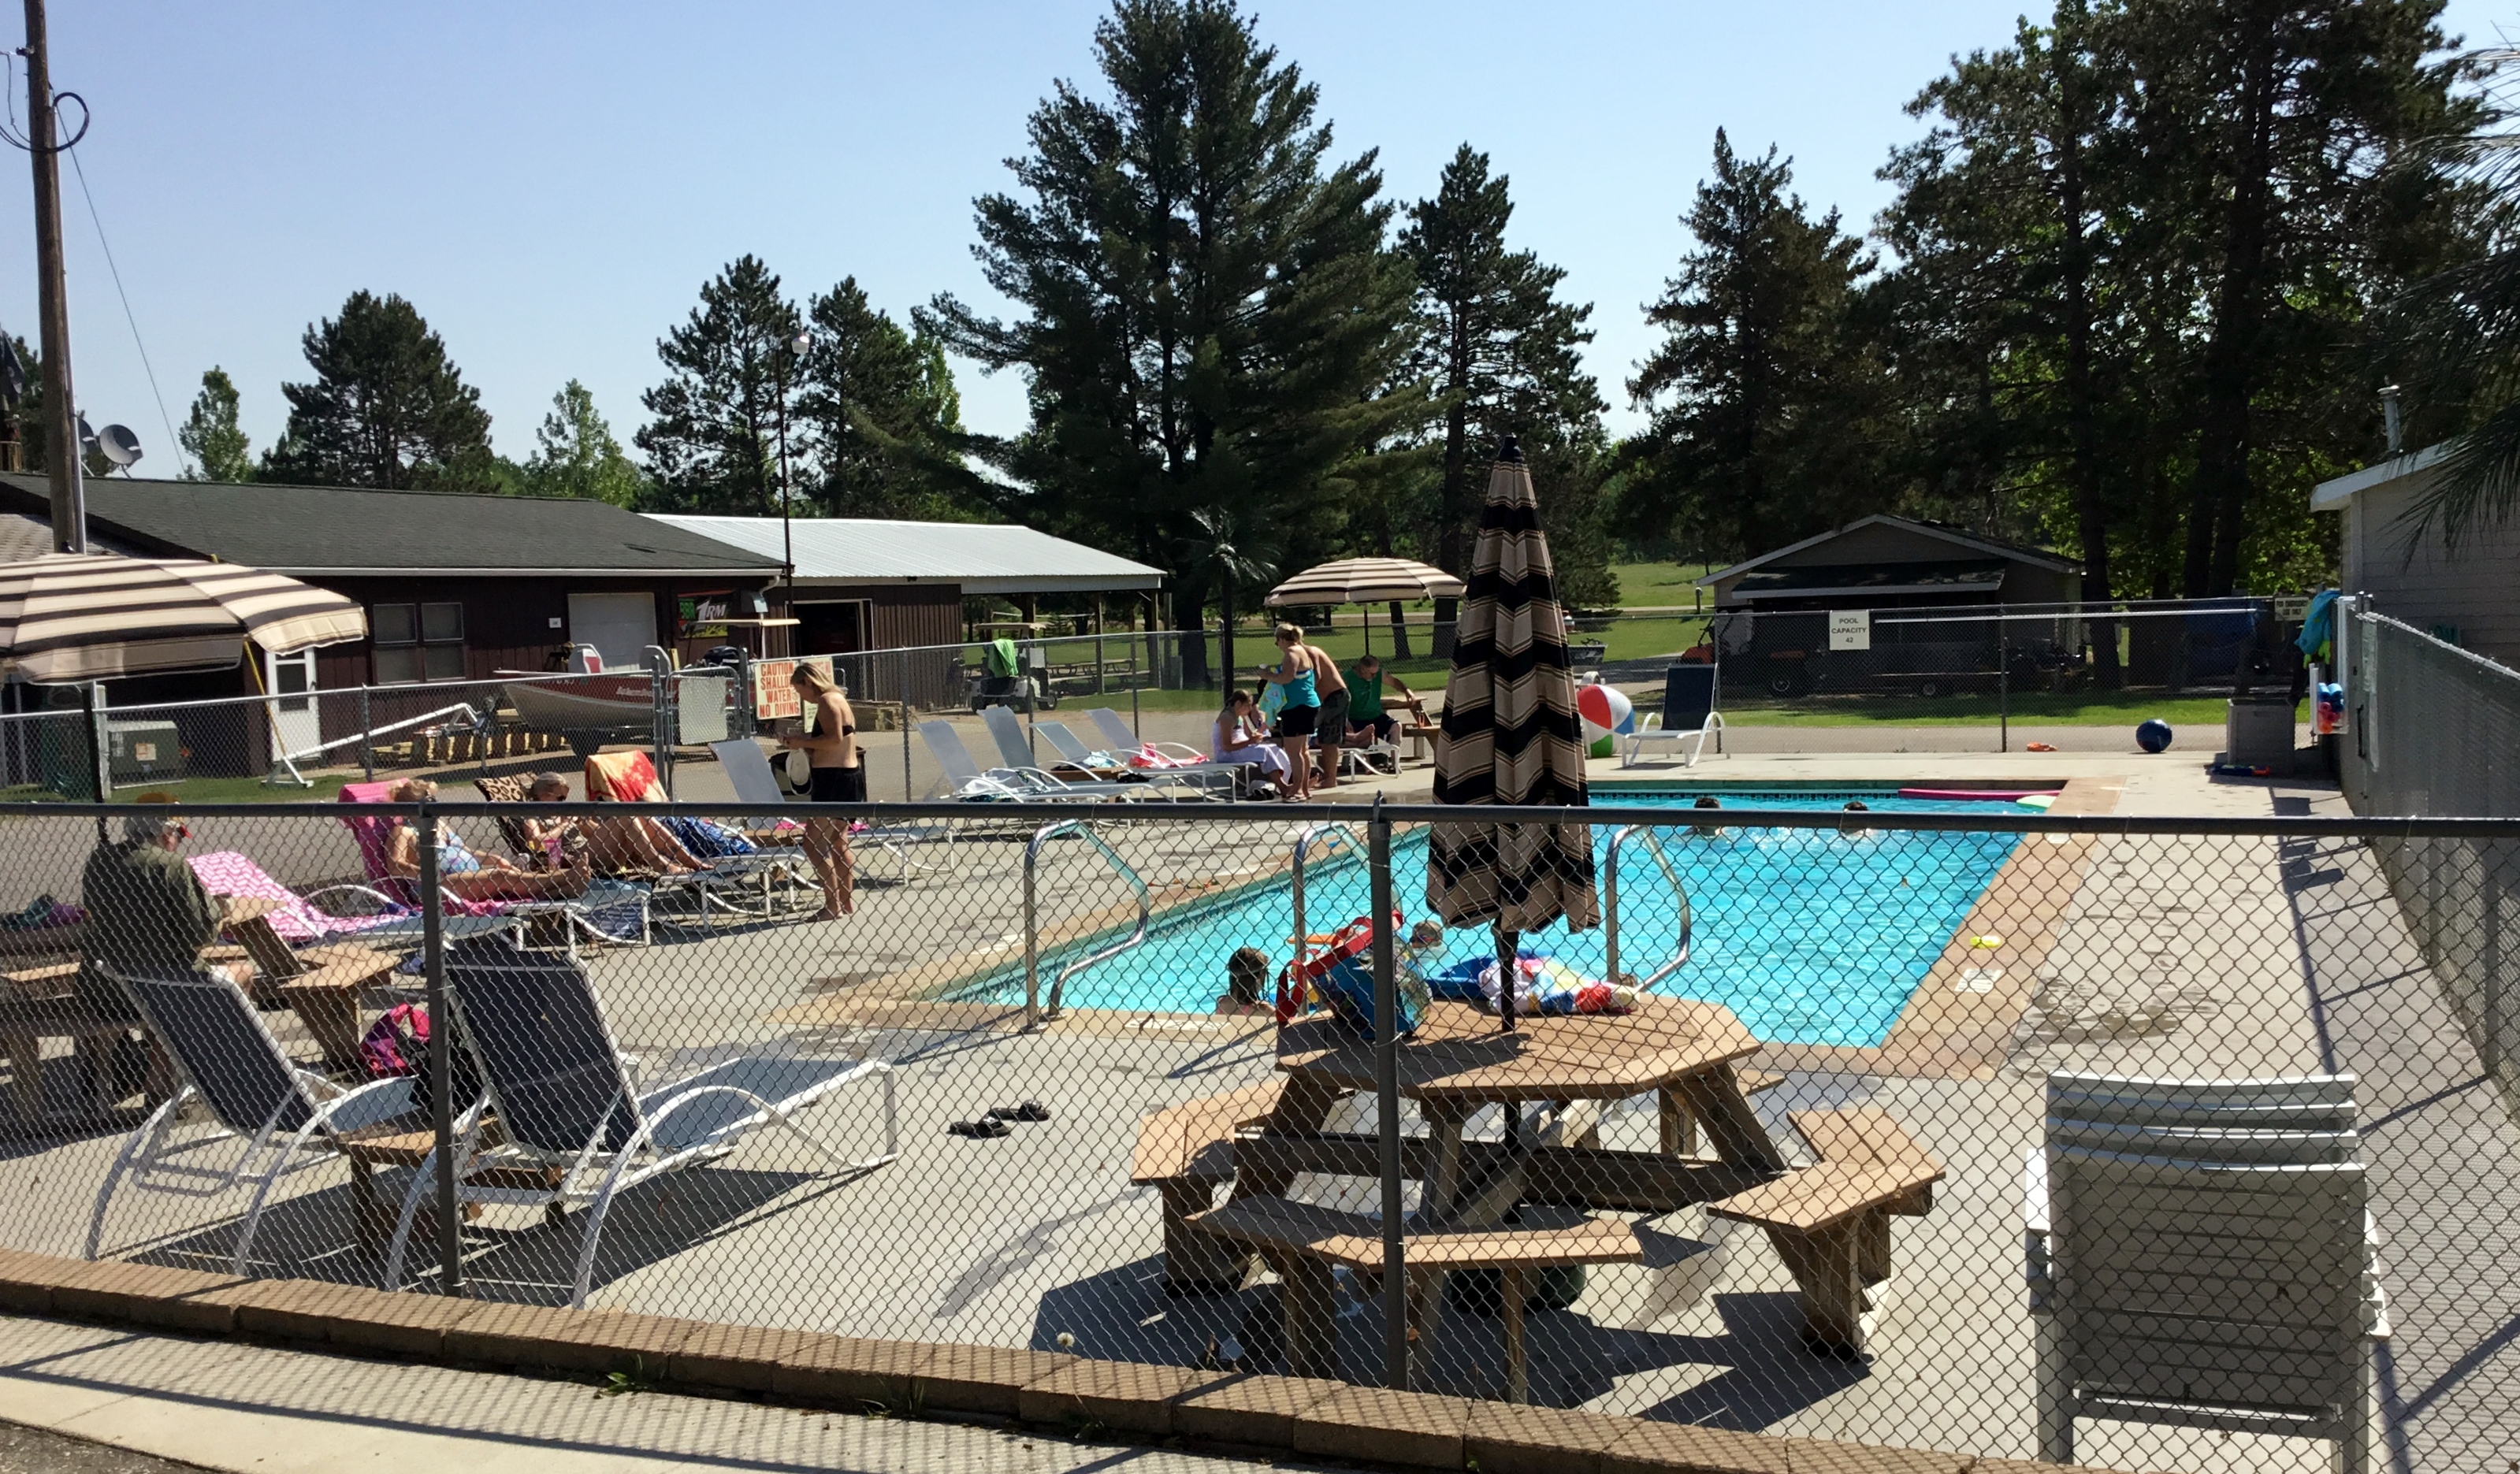 Balsam Beach Resort offers a pool for all of our guests.